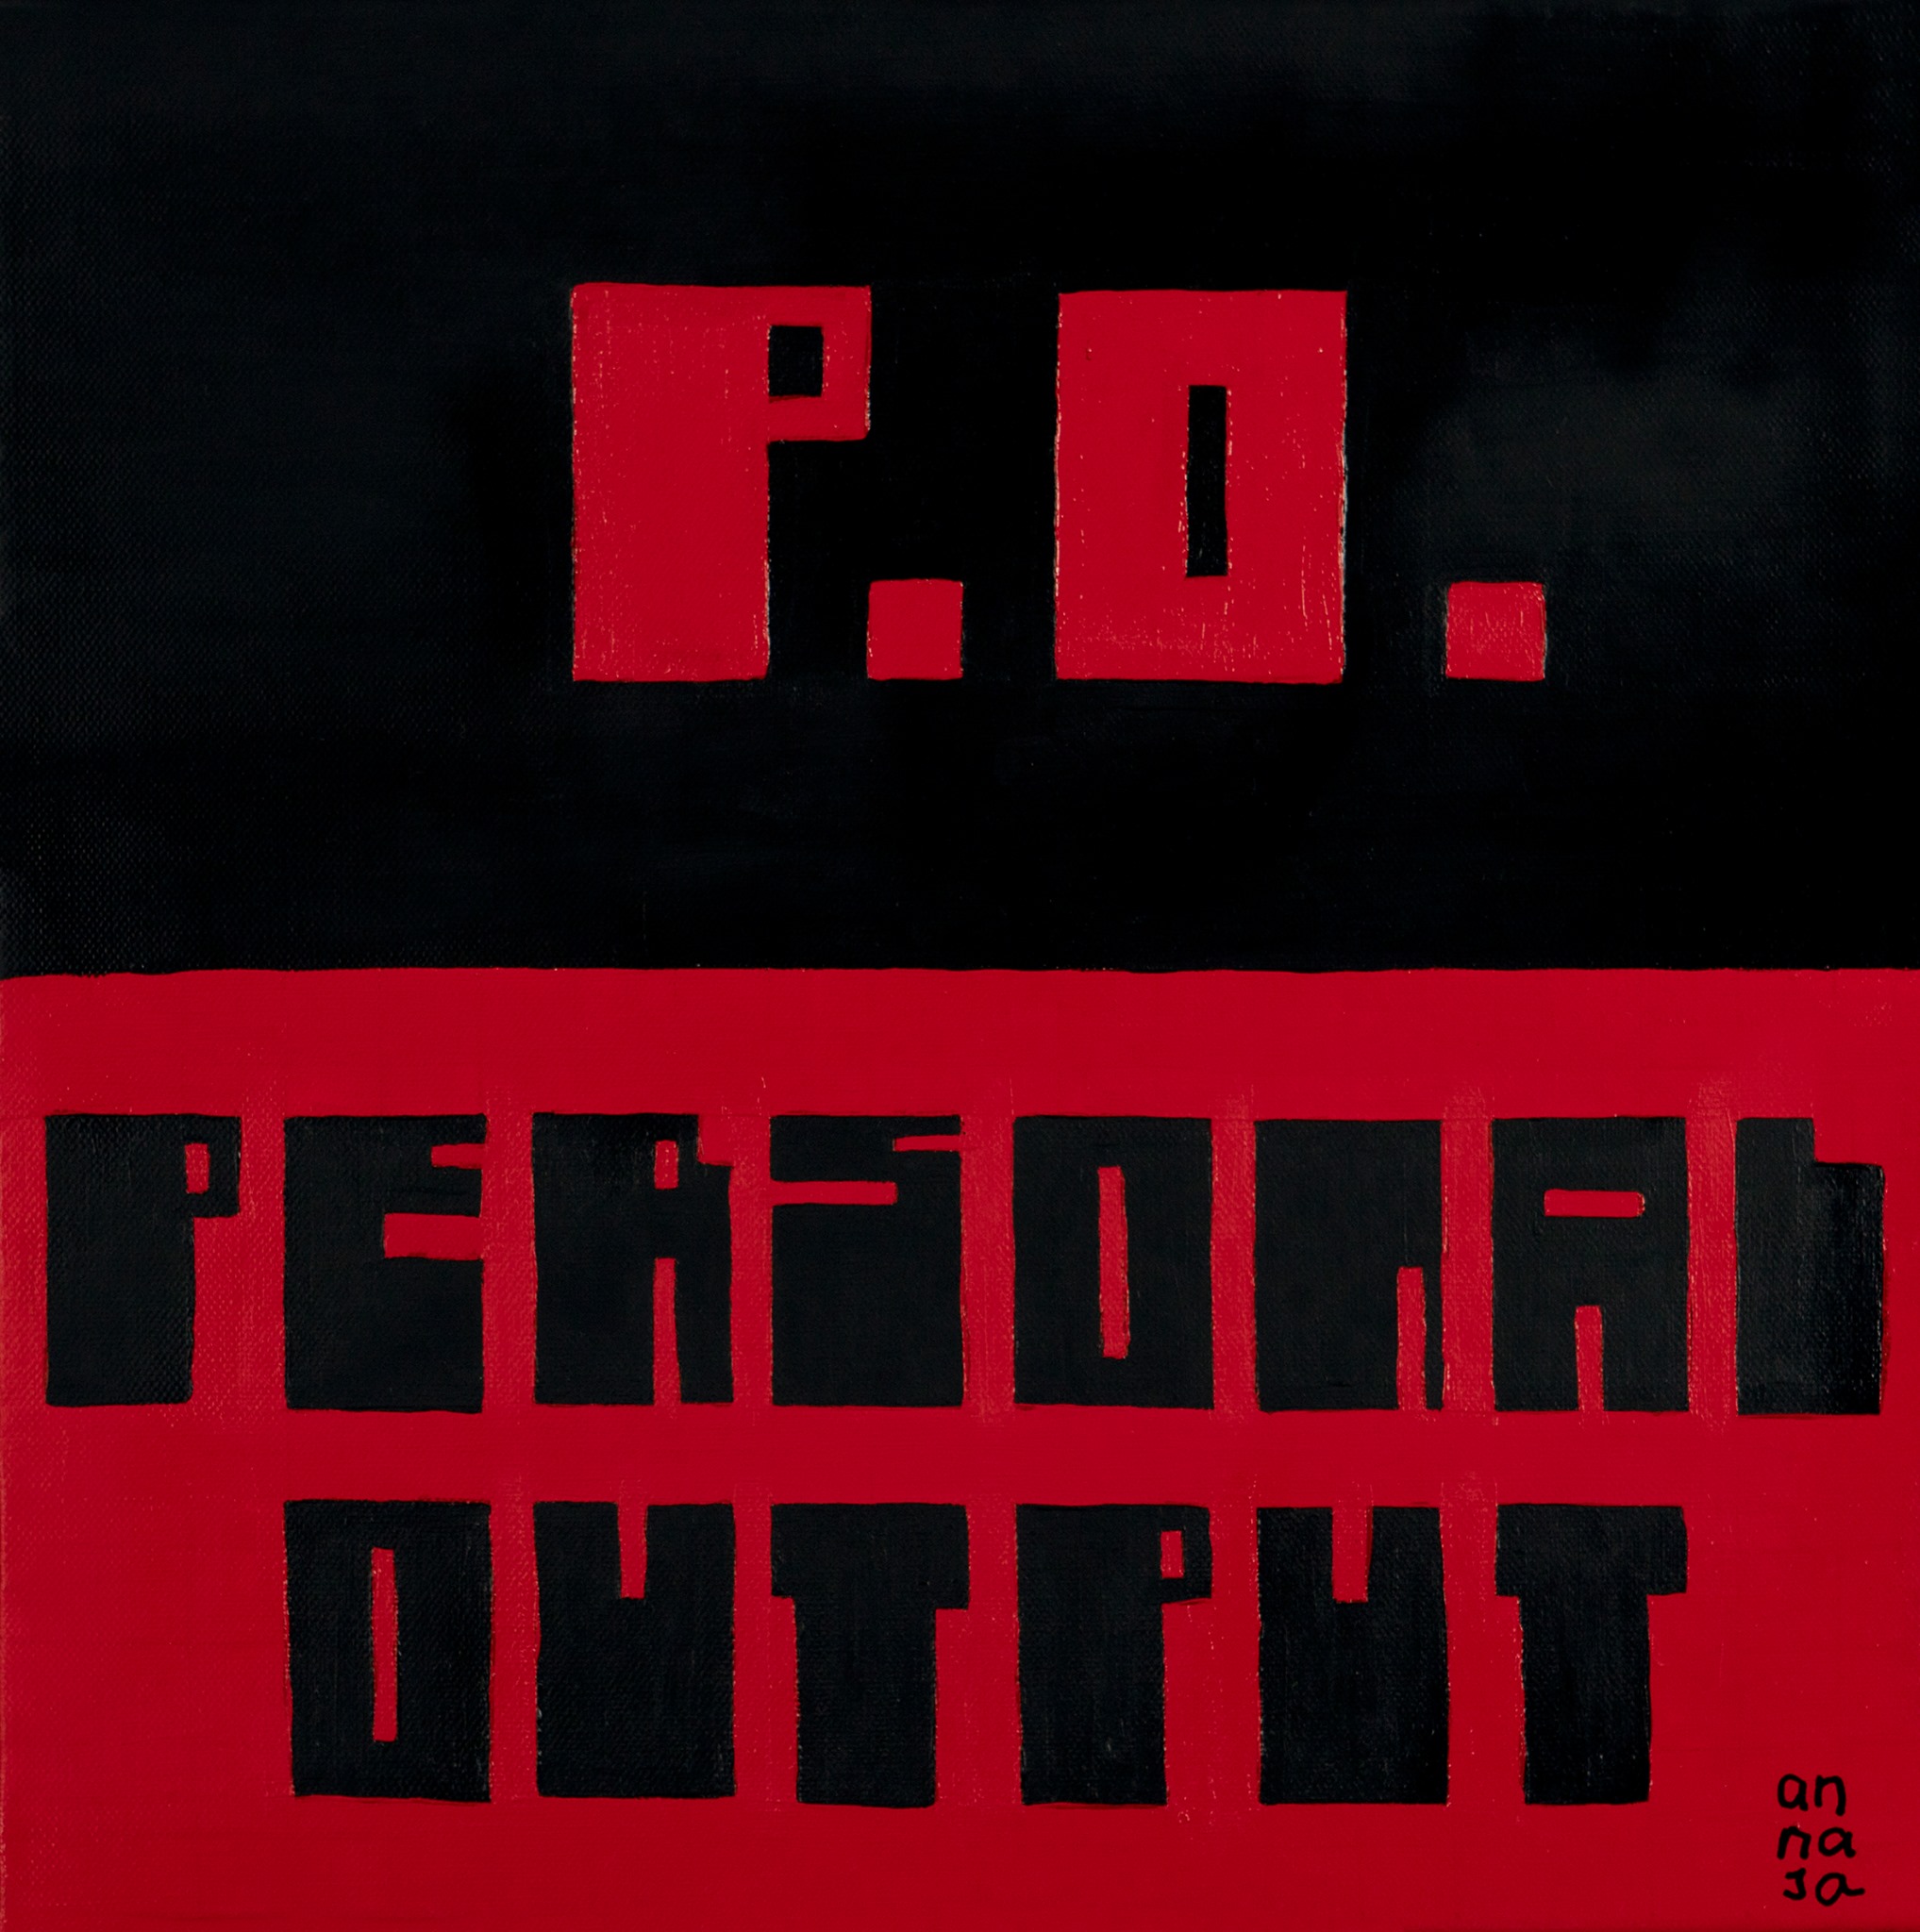 Personal Output